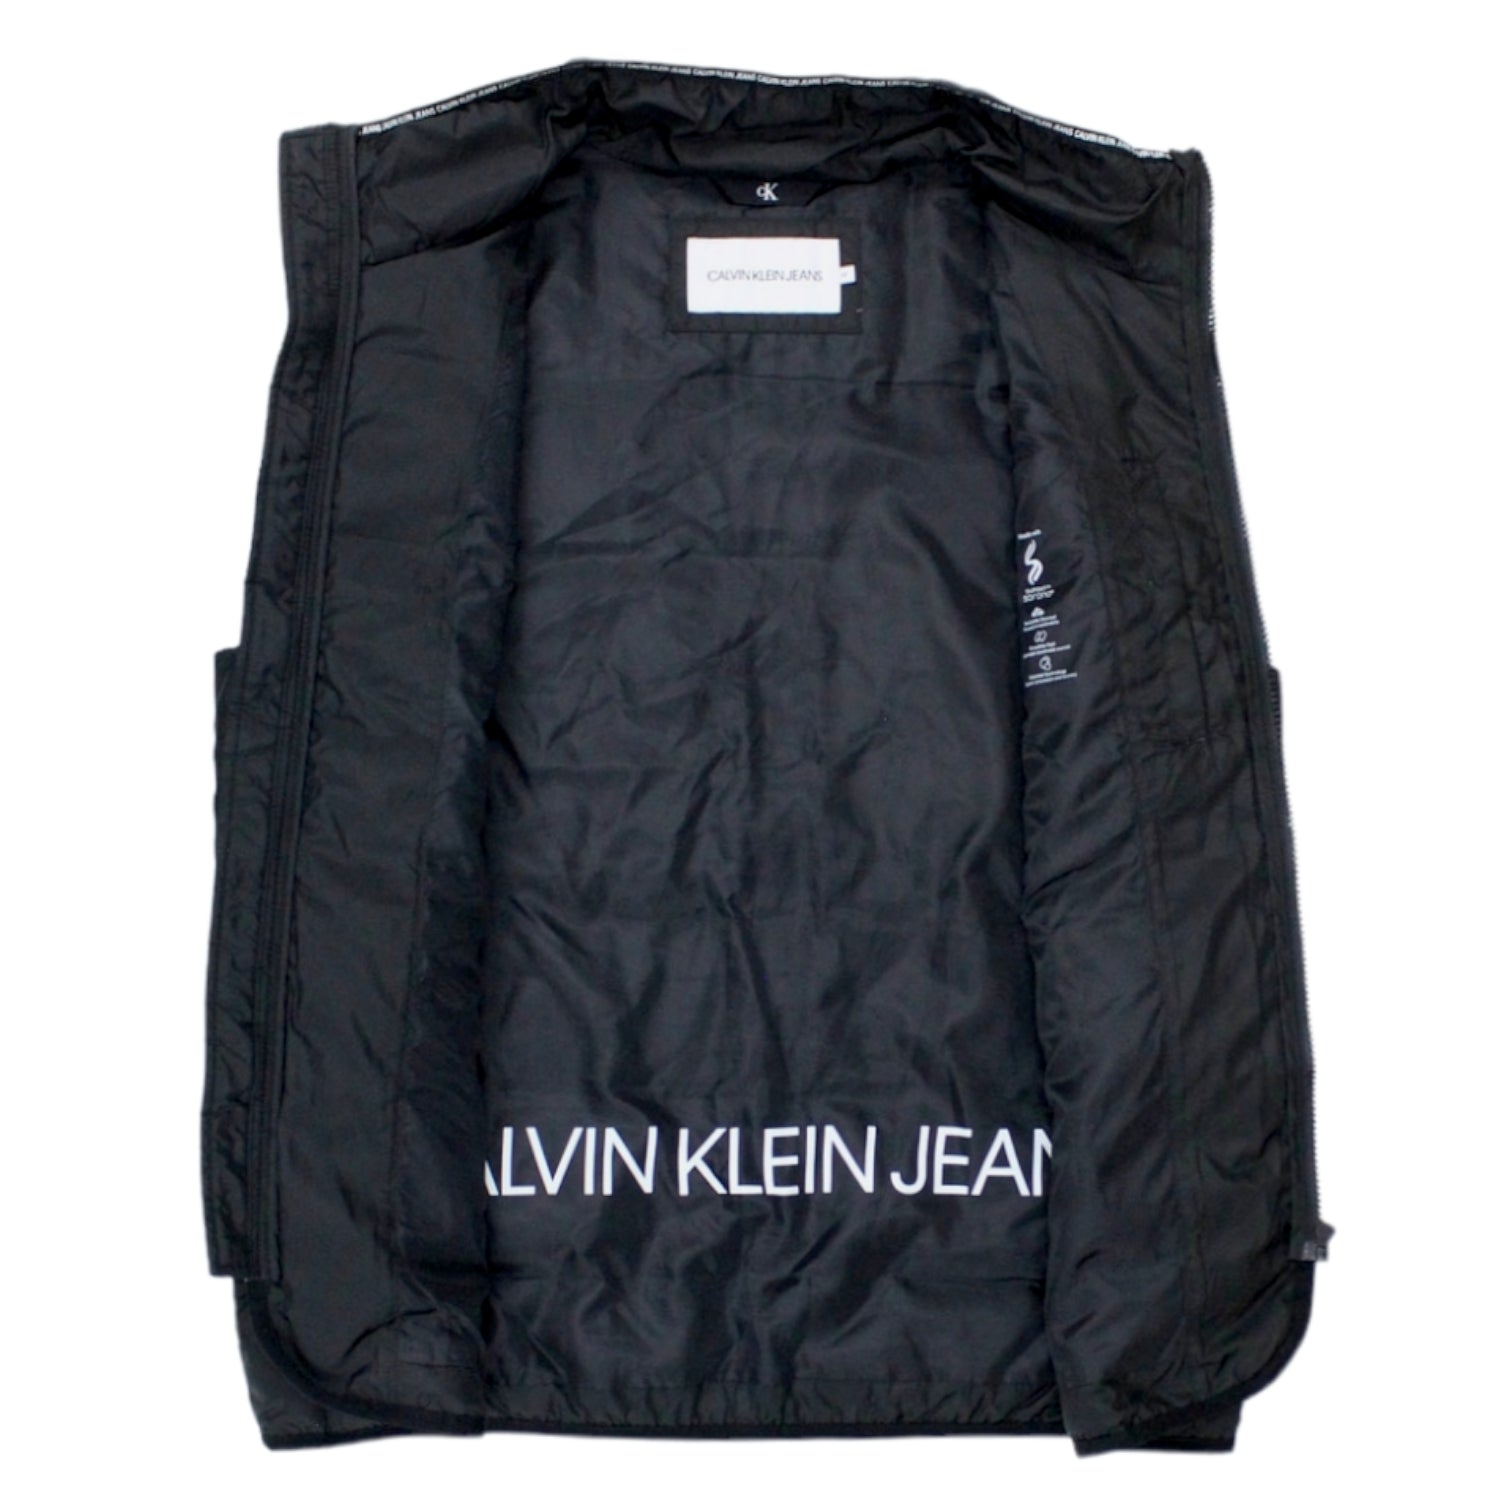 Calvin Klein Jeans Black Quilted Gilet